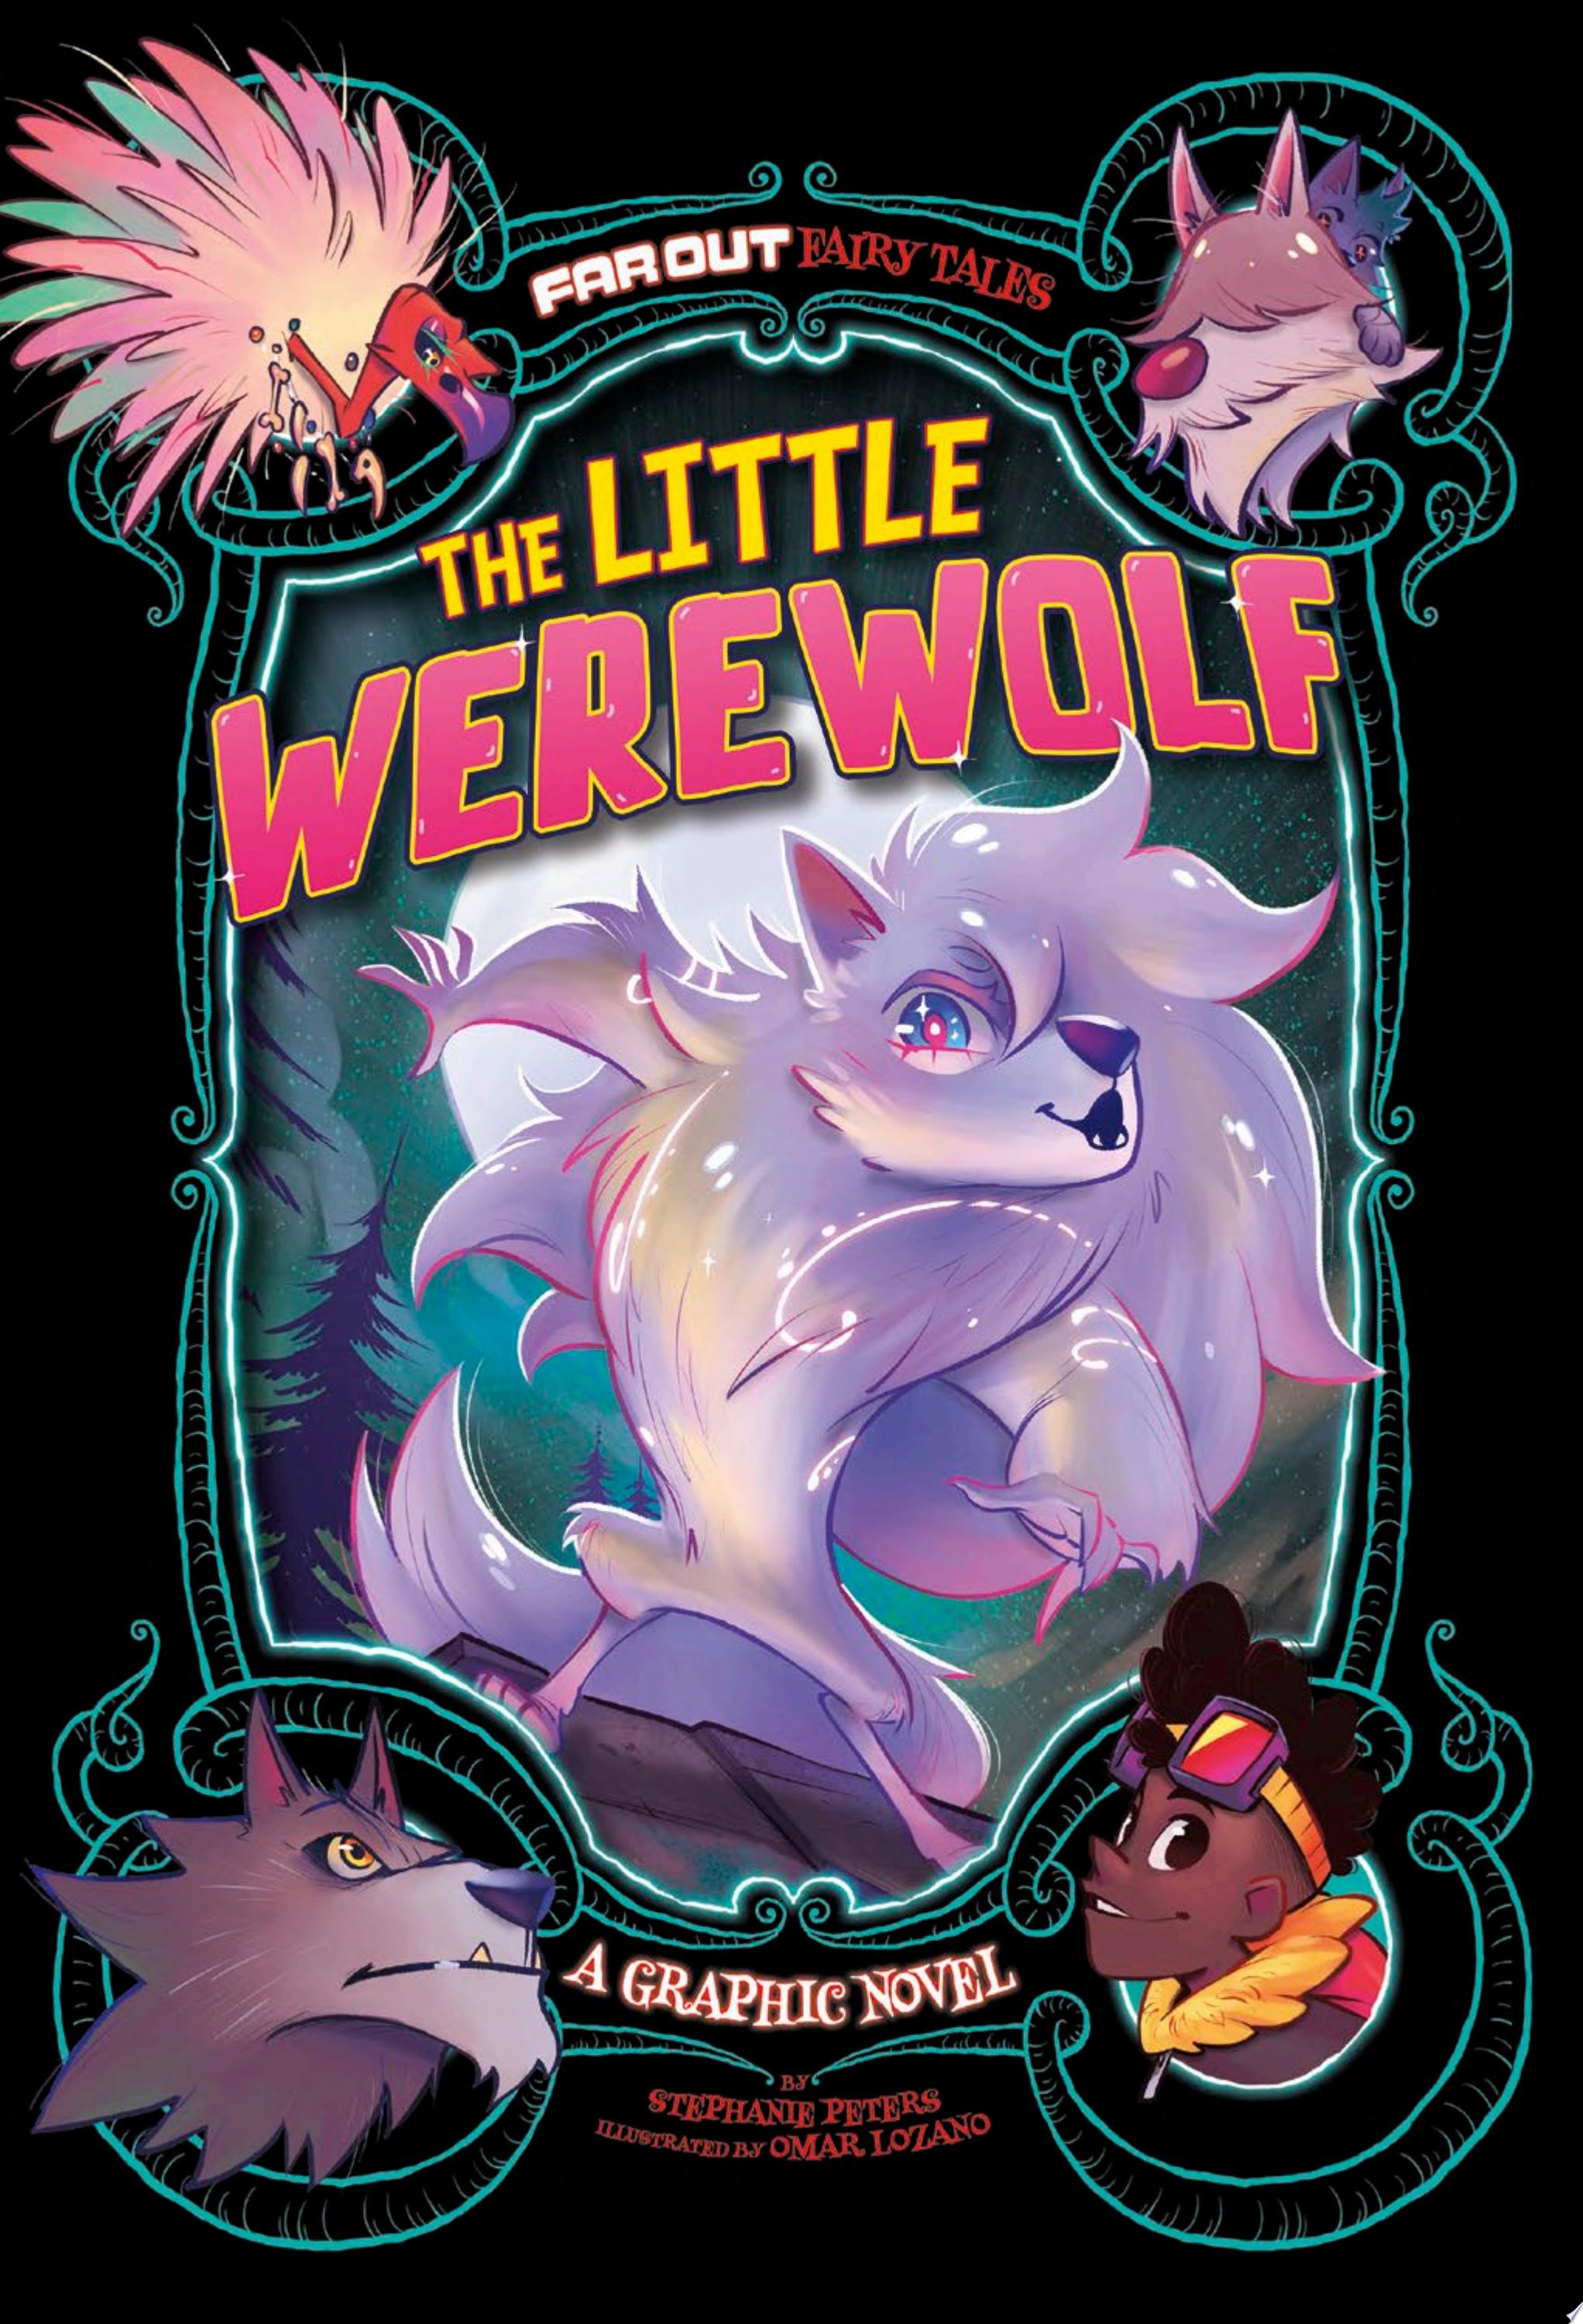 Image for "The Little Werewolf"